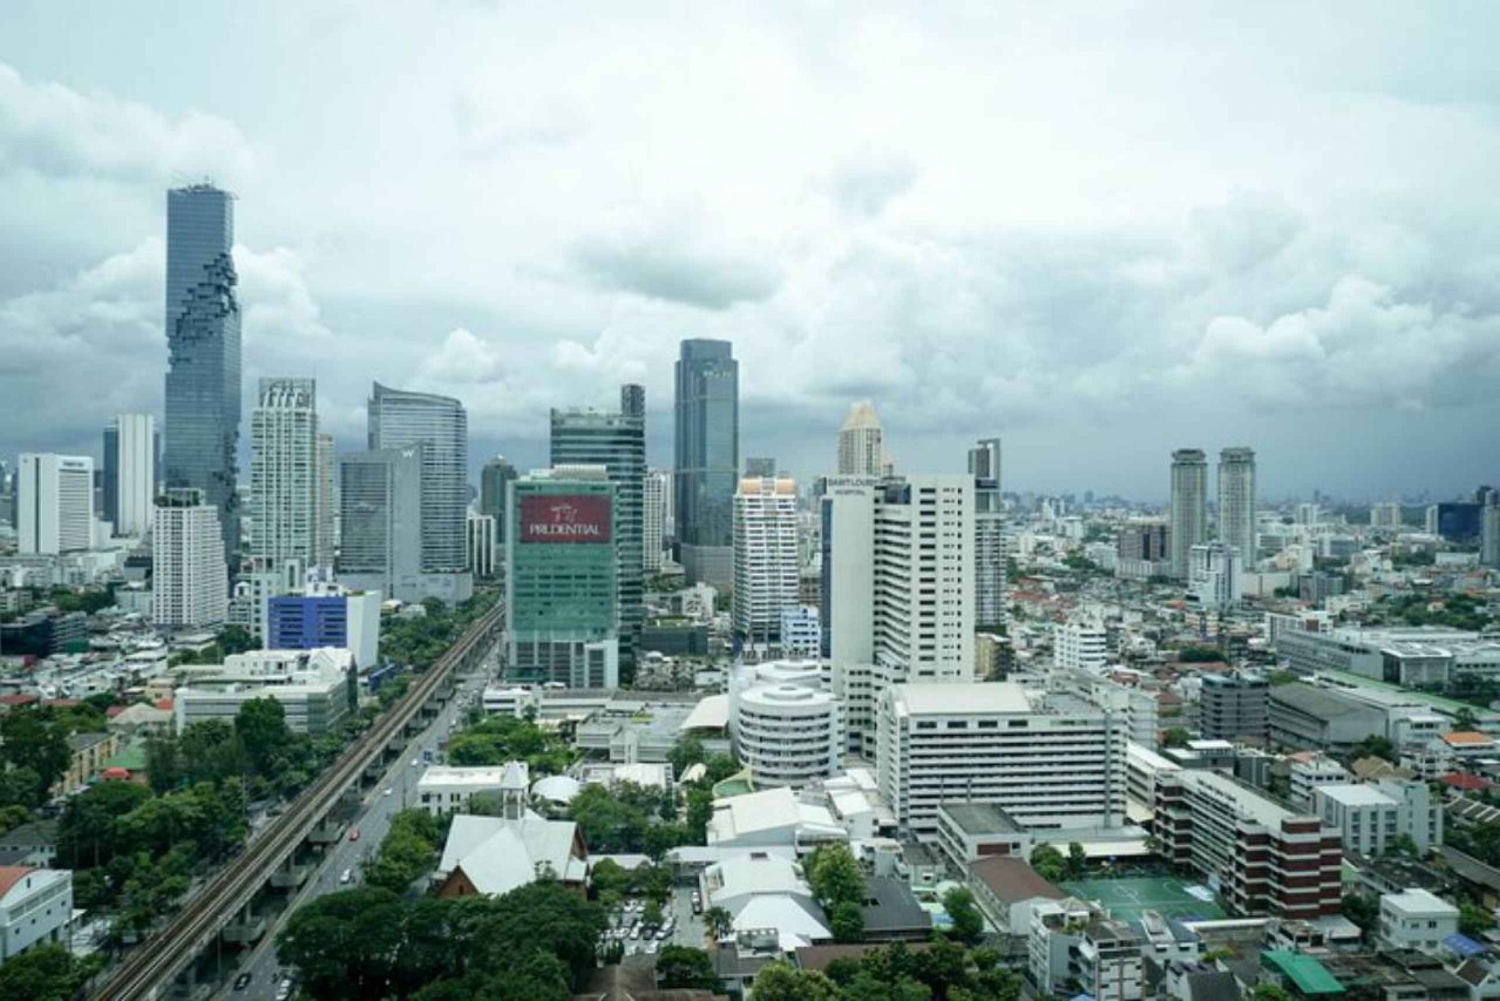 Thailand's Road to Democracy: A Self-Guided Audio Tour